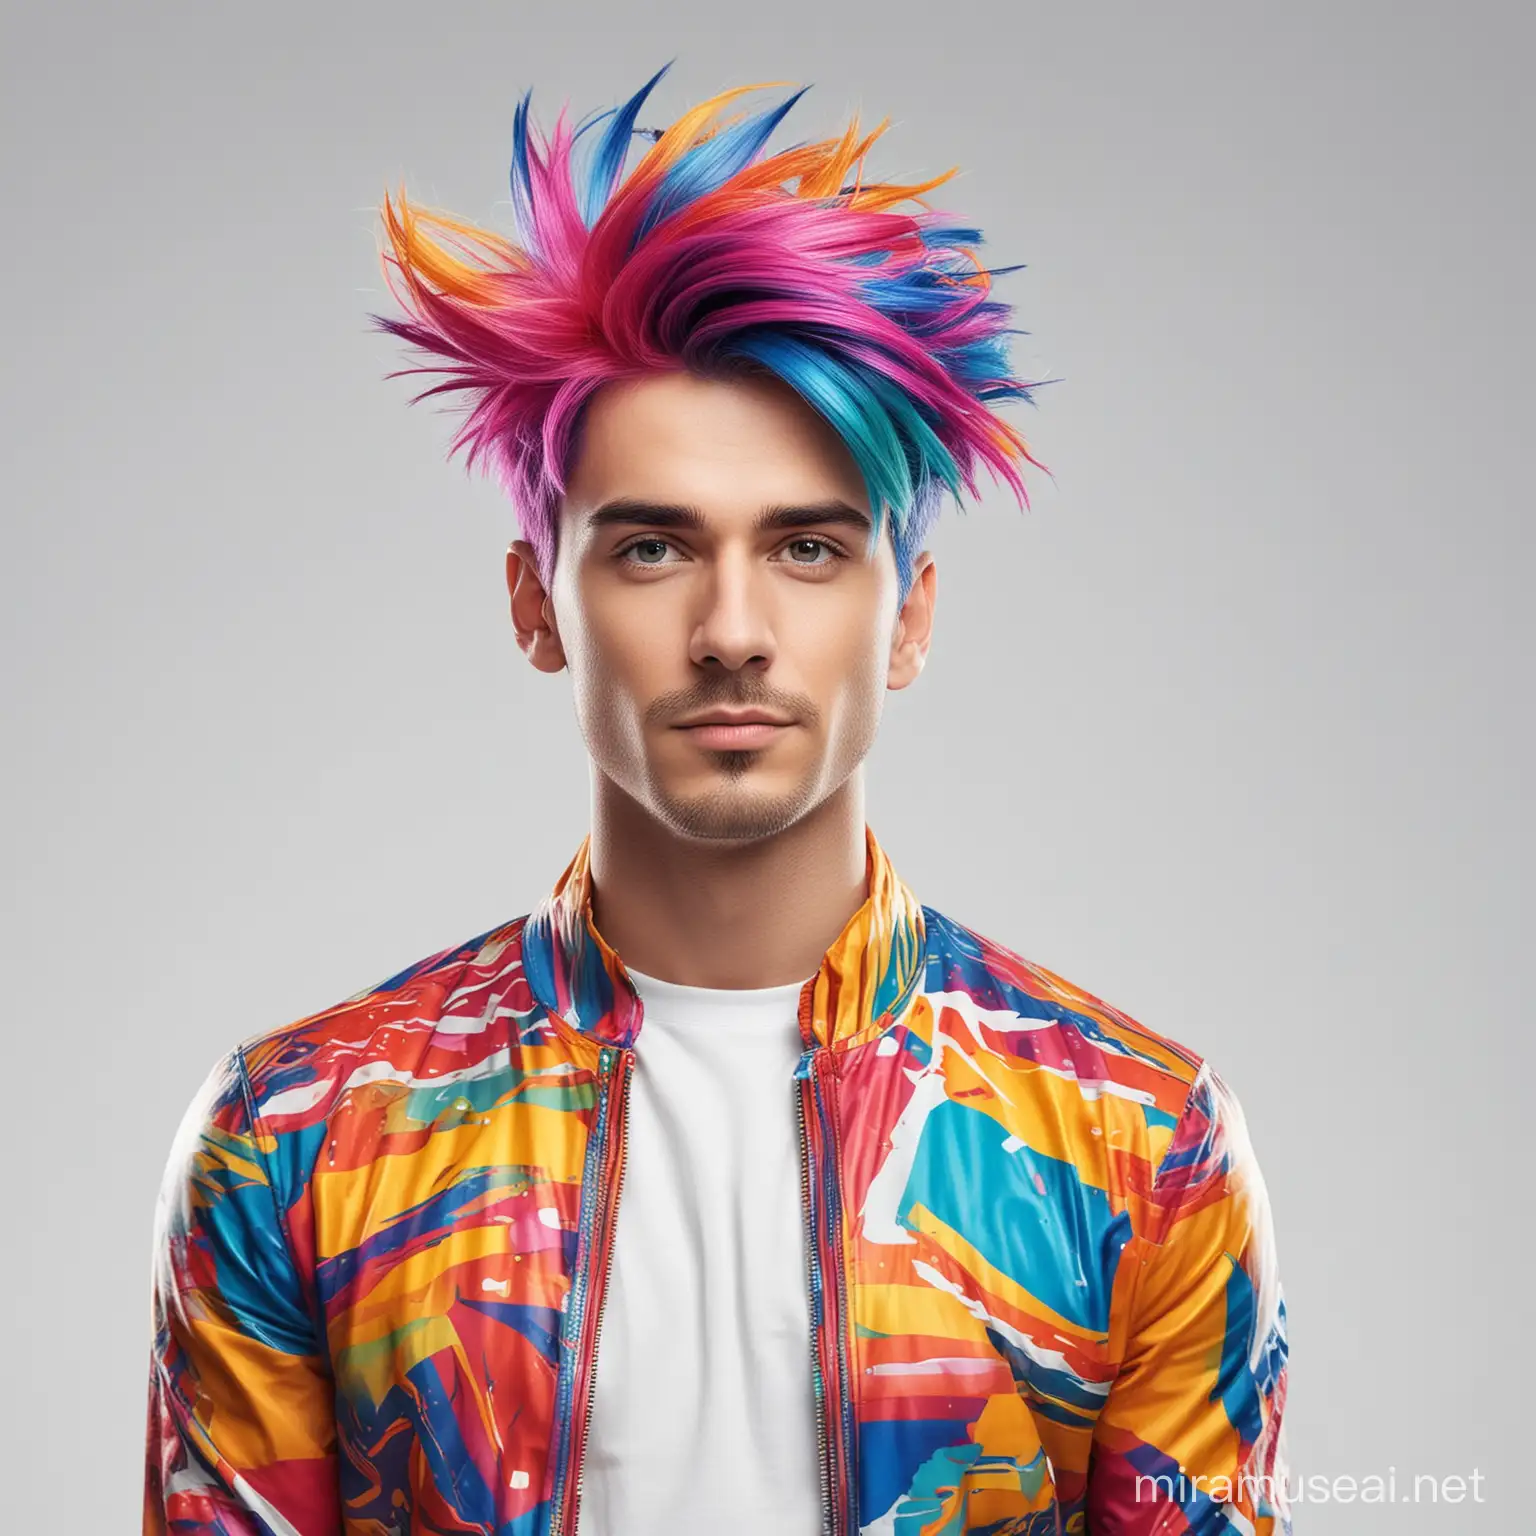 Colorfulhaired Man in Artistic Attire Vibrant 3D Portrait on White Background